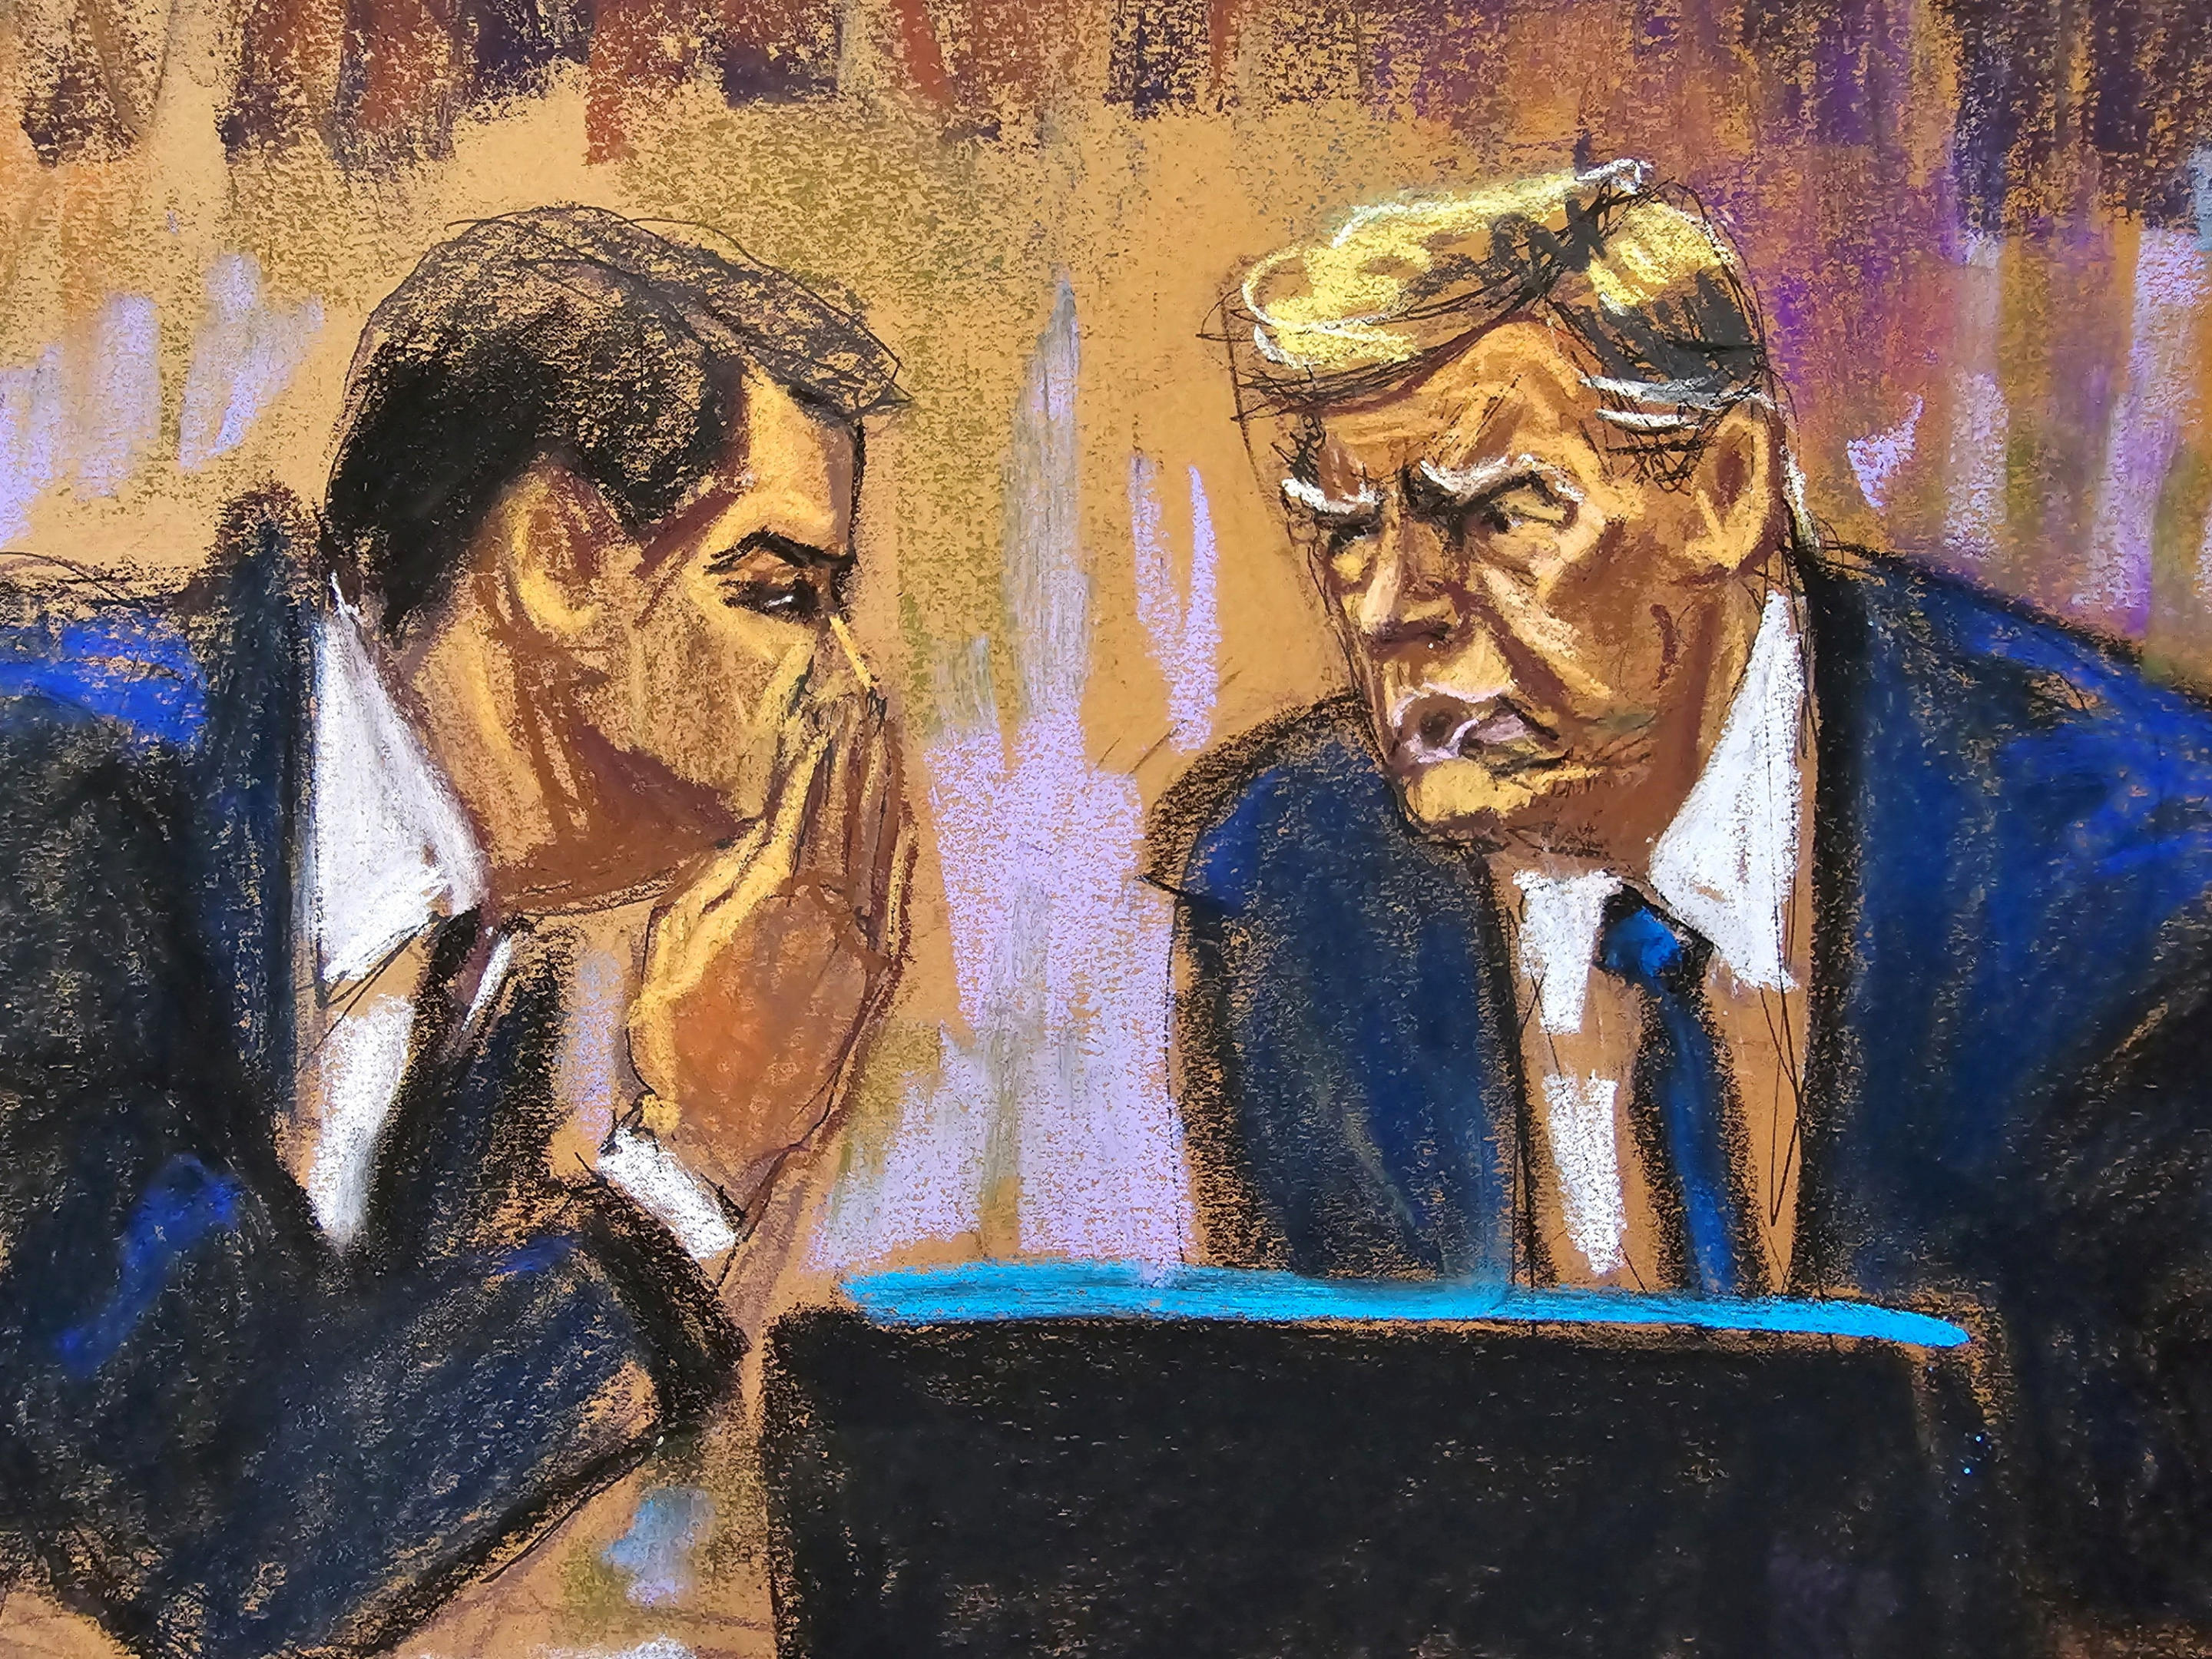 Former President Donald Trump listens to his lawyer Todd Blanche during jury selection.